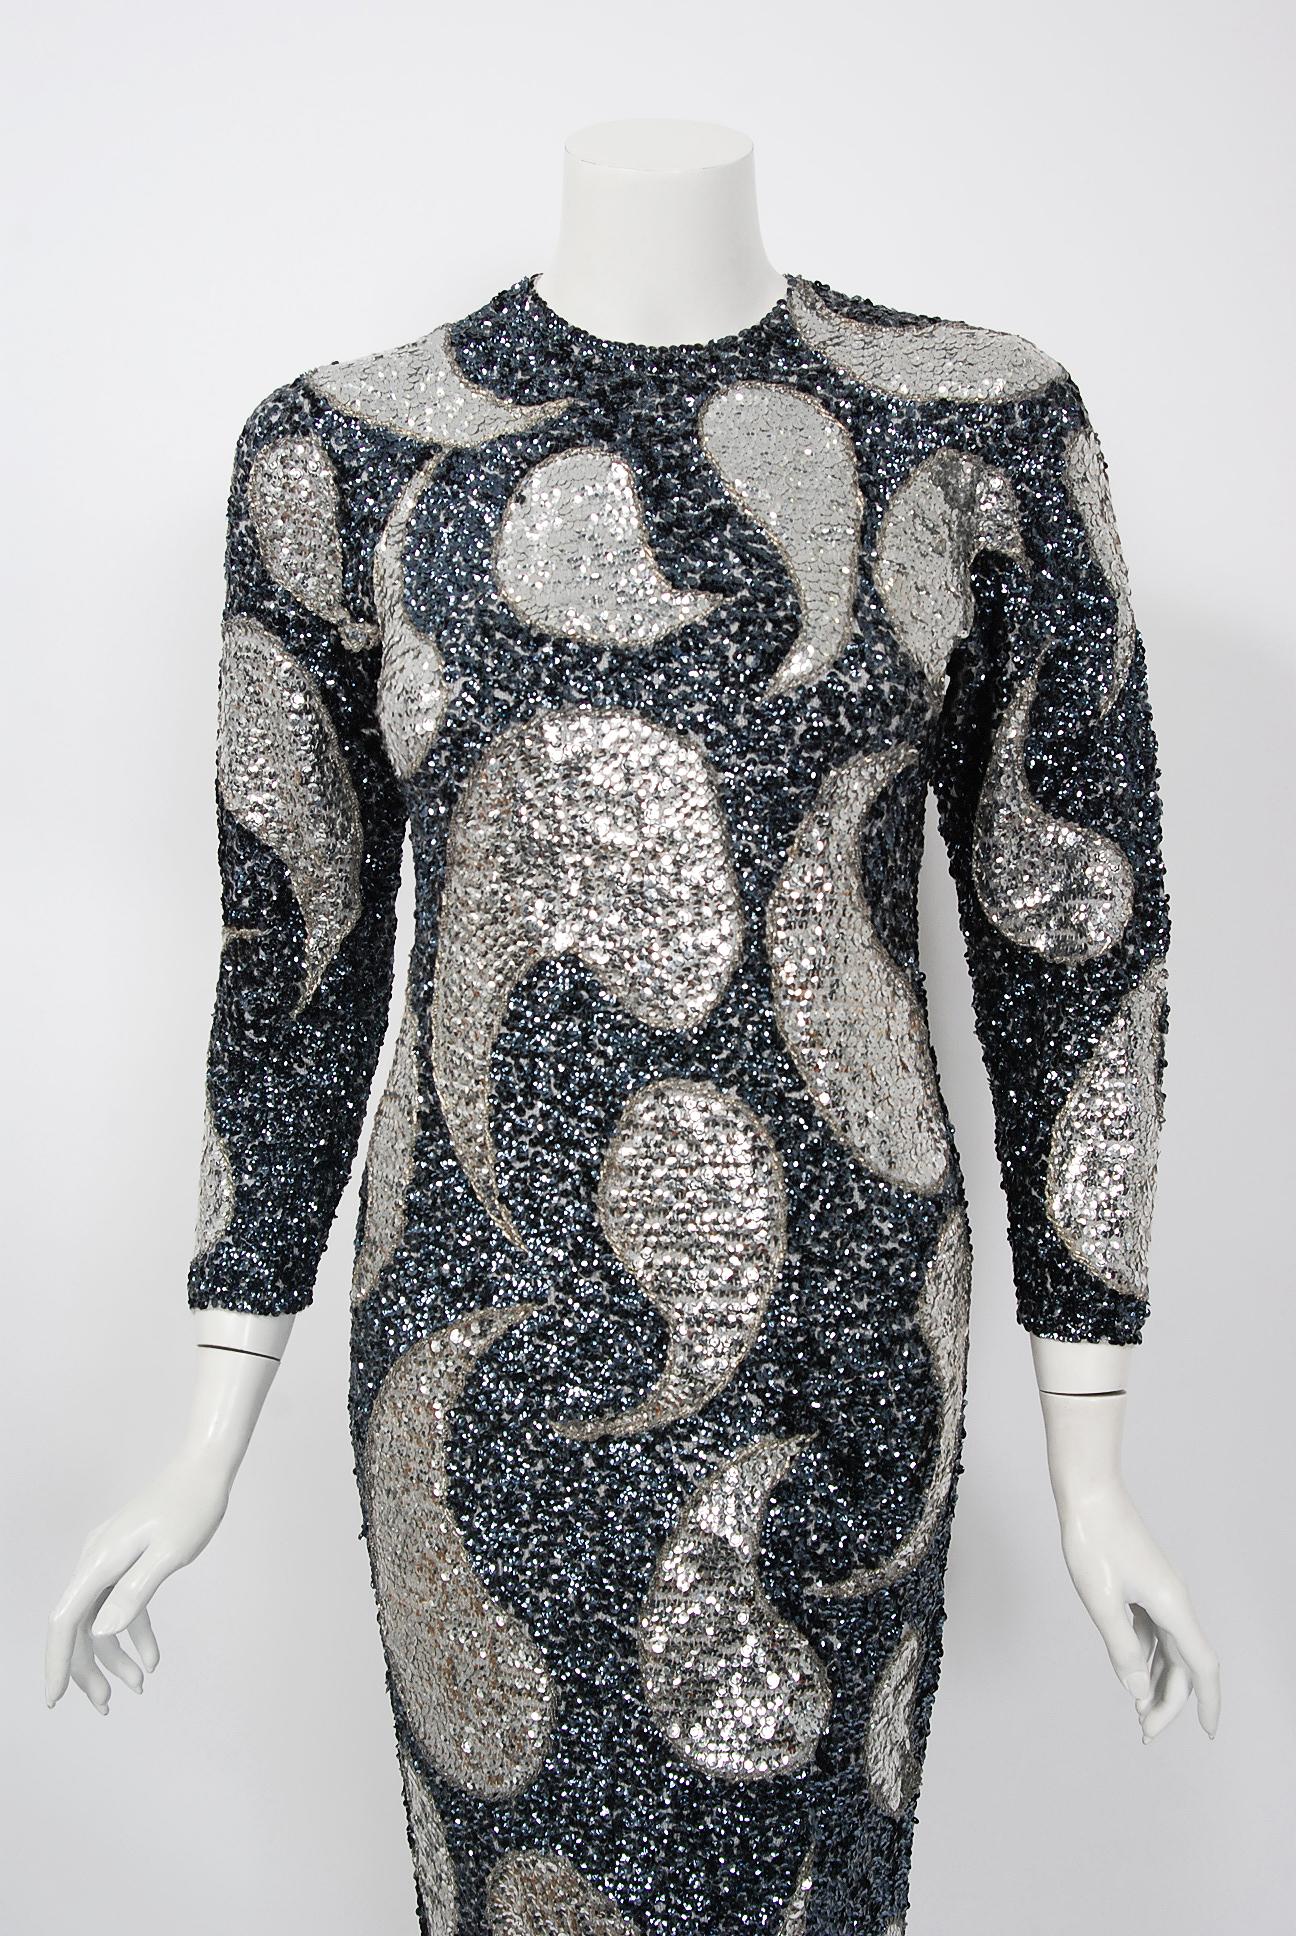 Mid-century Gene Shelly designer garments are in a class of their own. They are always fully-sequined by hand and fit to flatter the figure. This early 1960's treasure has a fantastic graphic paisley design worked in, featuring iridescent-beadwork.